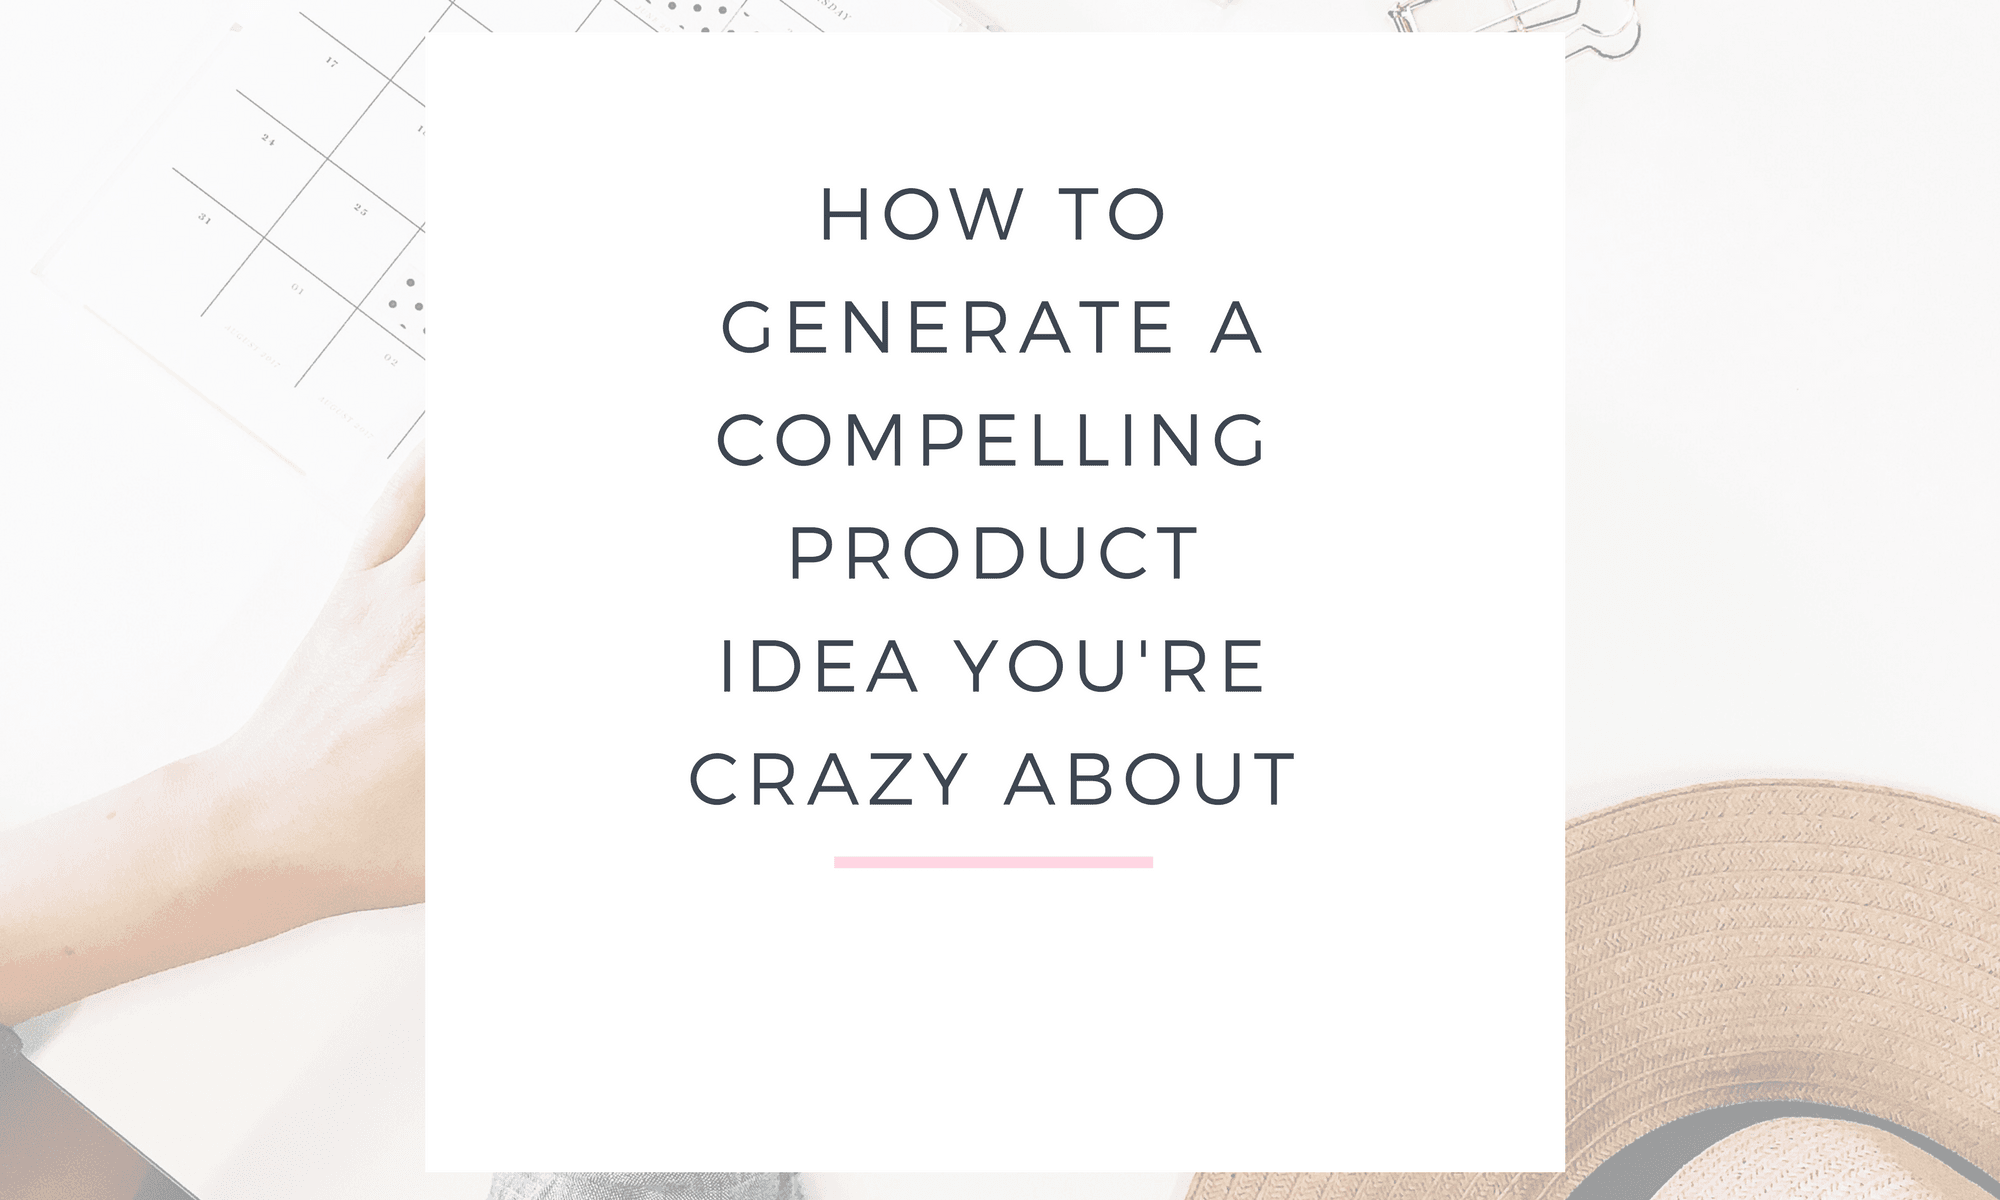 HOW TO GENERATE A COMPELLING PRODUCT IDEA YOU'RE CRAZY ABOUT